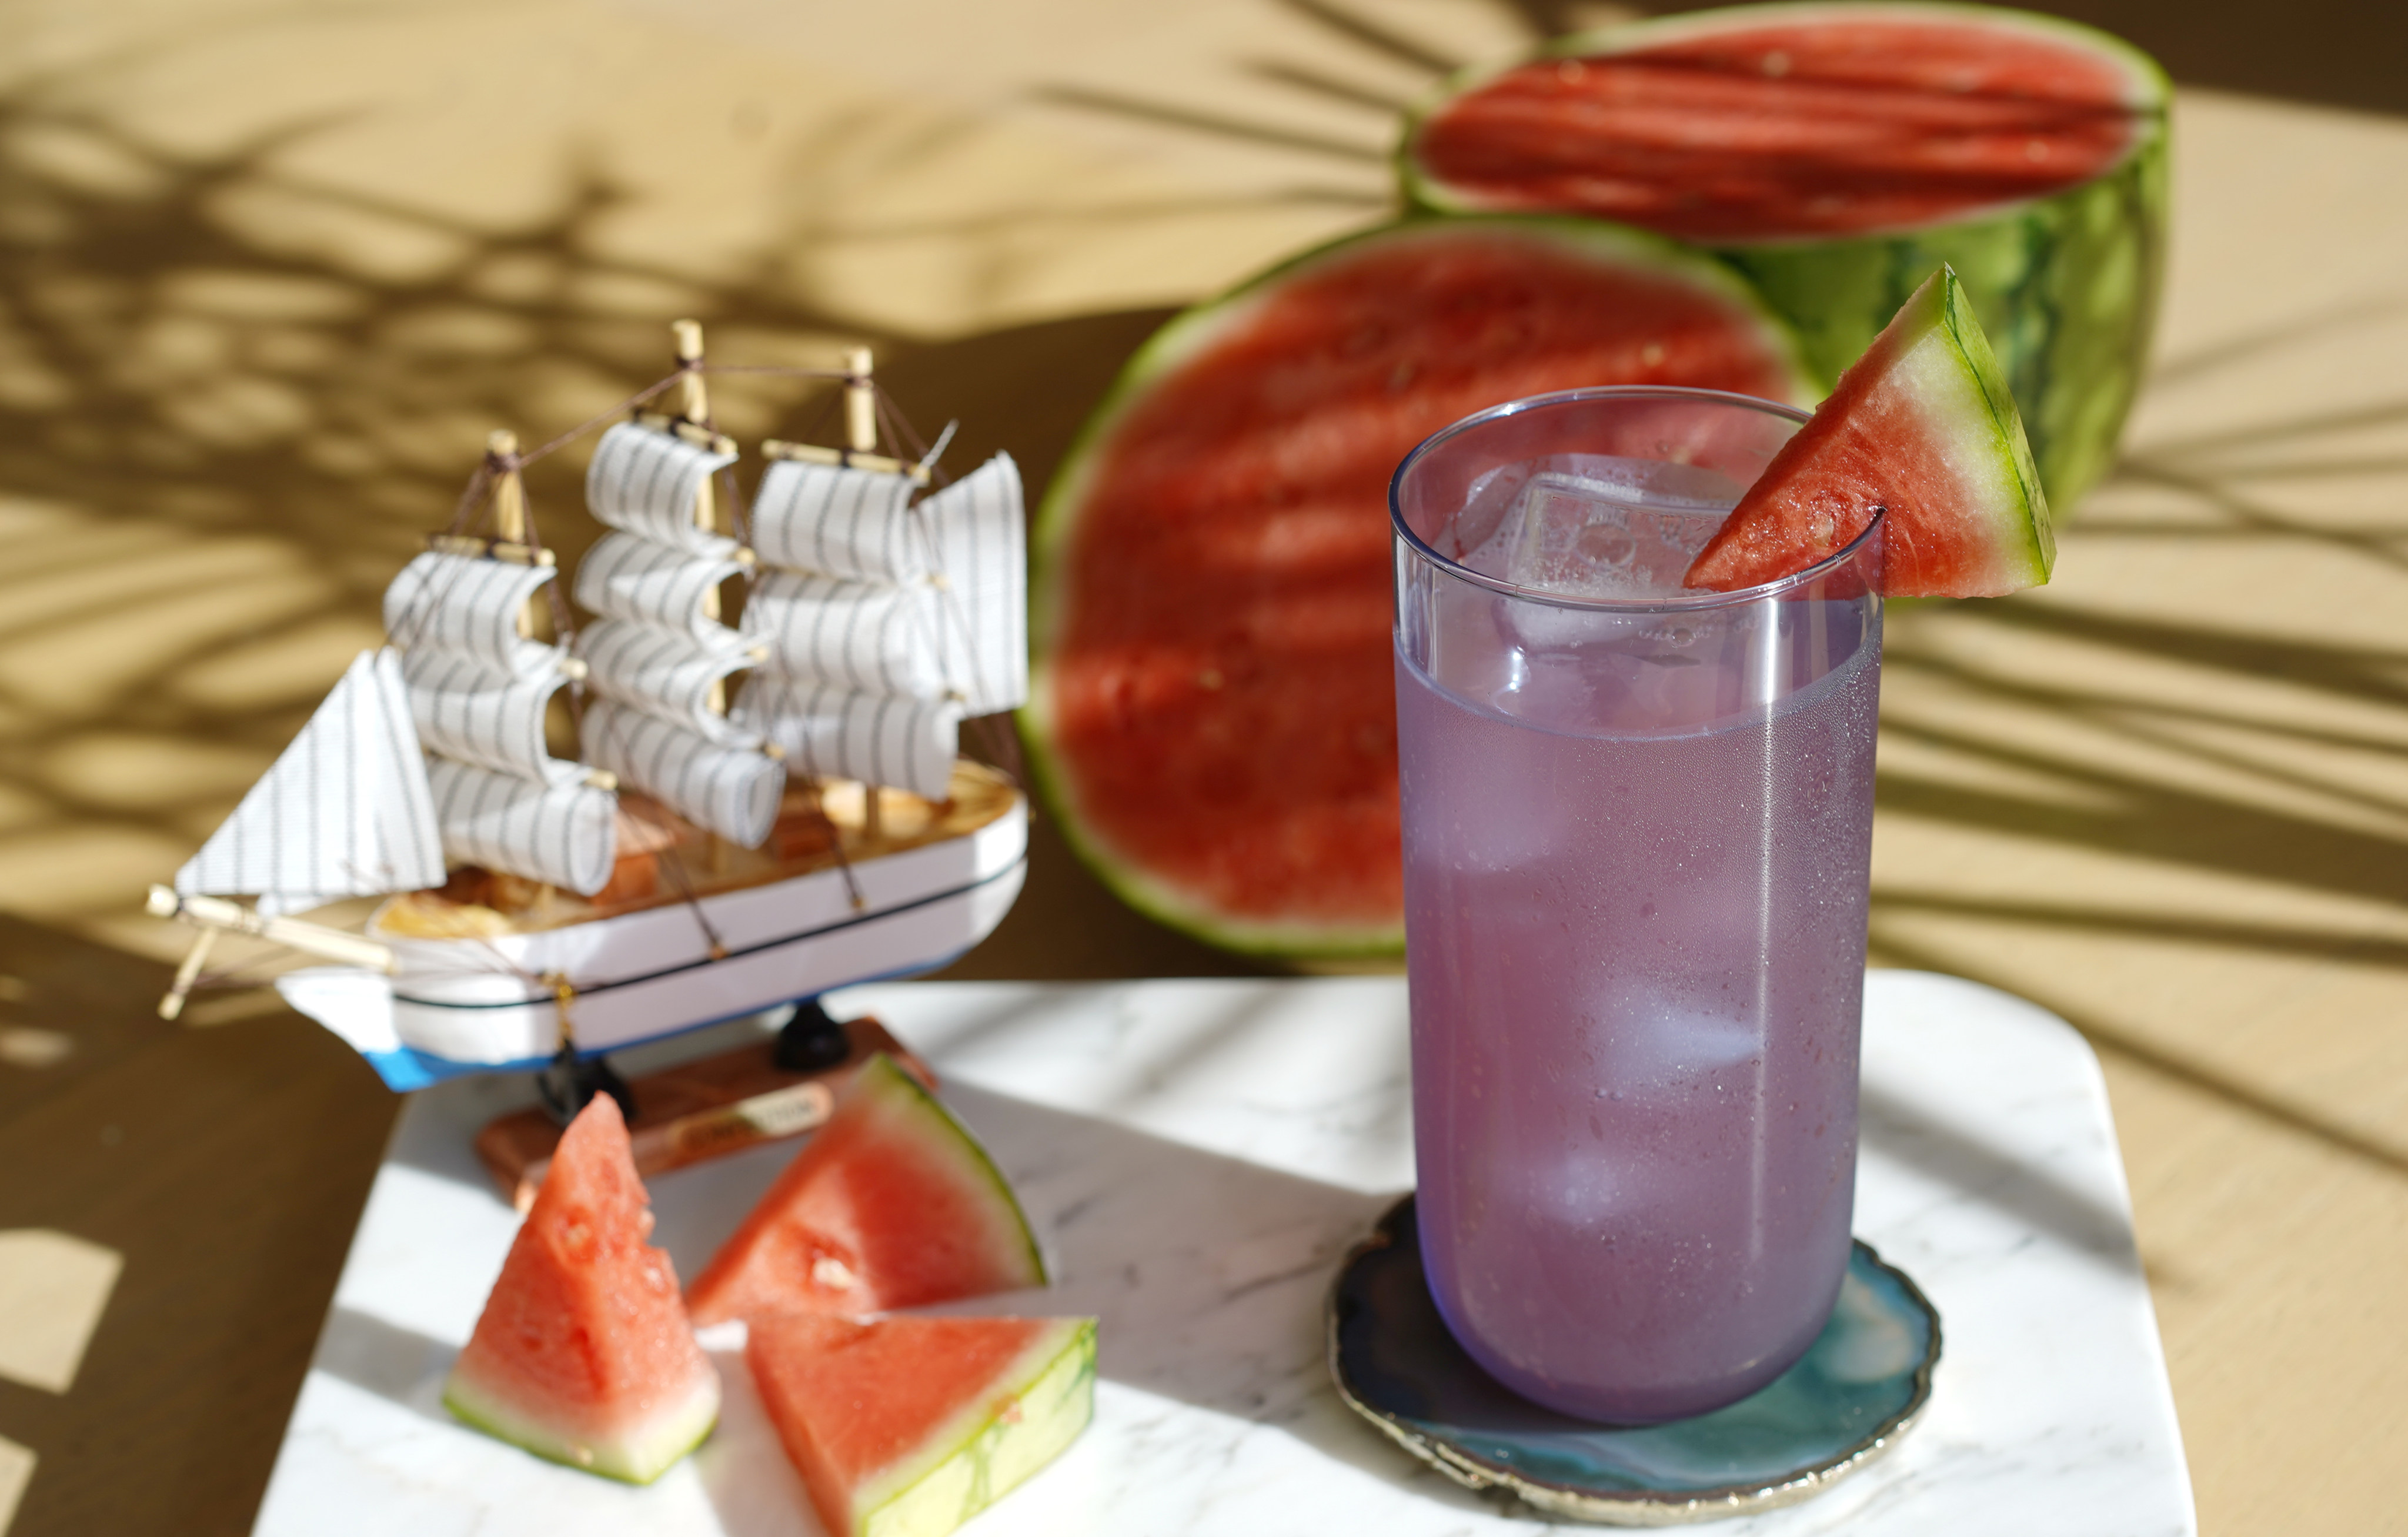 Drinks from 7-Eleven are standard junk boat fare, but you can make your on-board bar so much better with home-made drinks. Anyone fancy a Lazy Boat Paloma? Photo: Victoria Chow